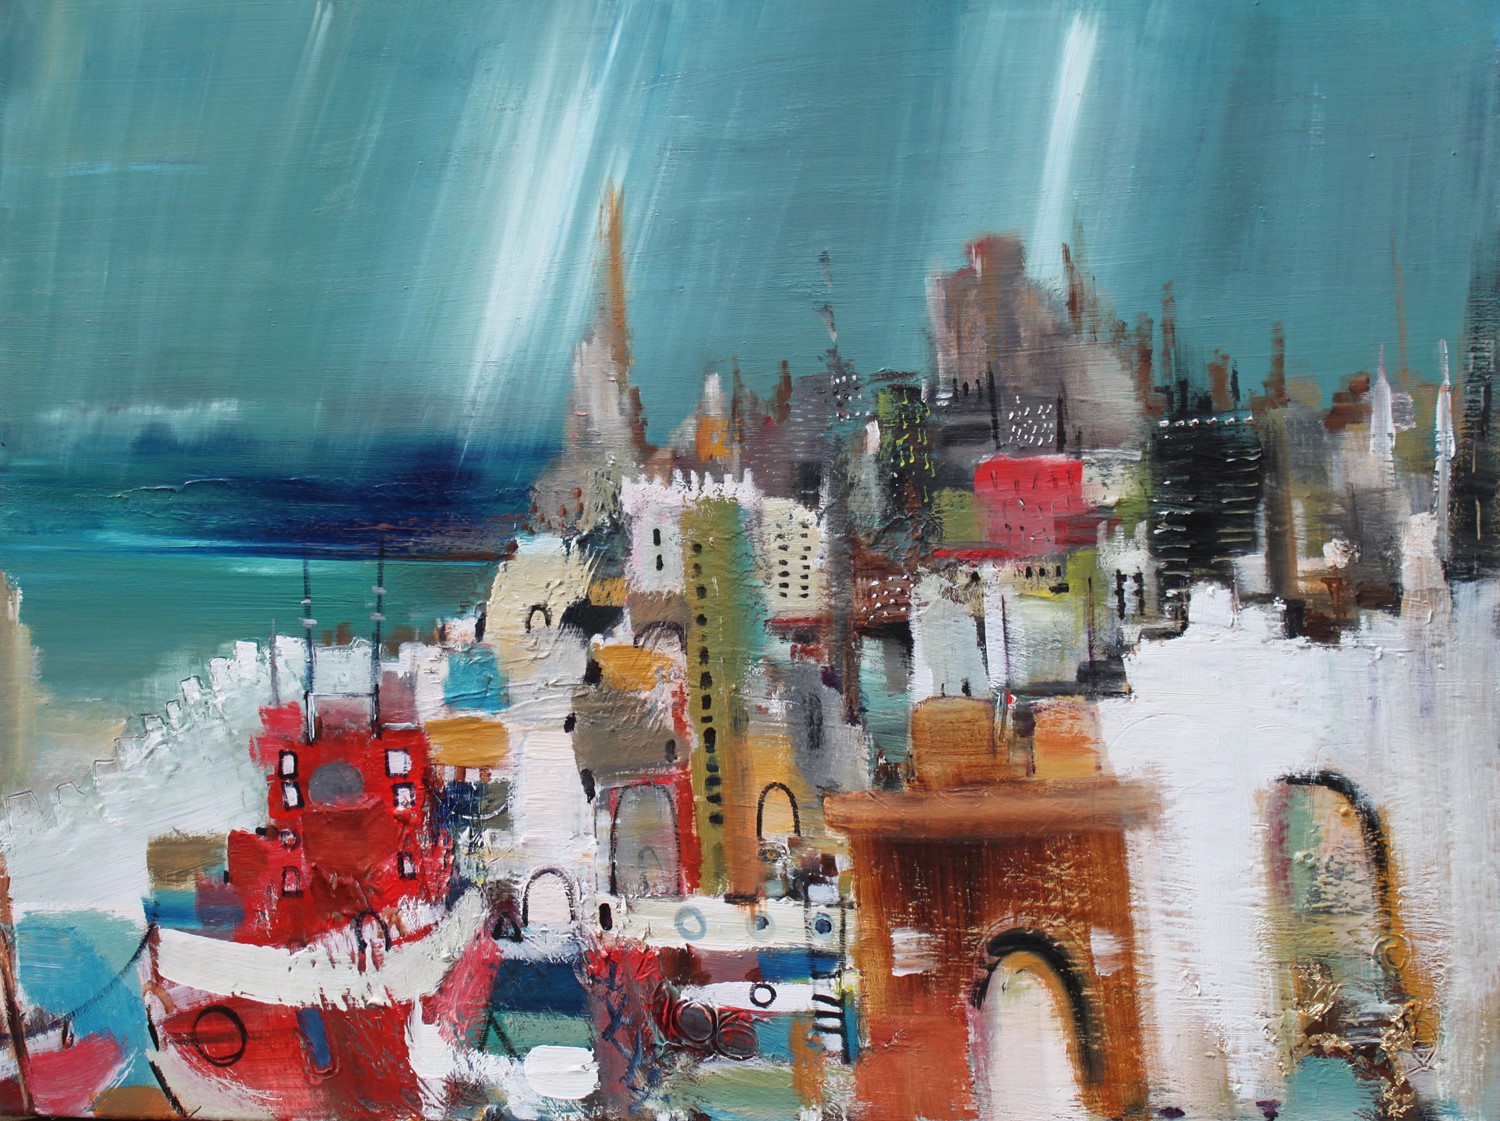 'Docked at the Port' by artist Rosanne Barr